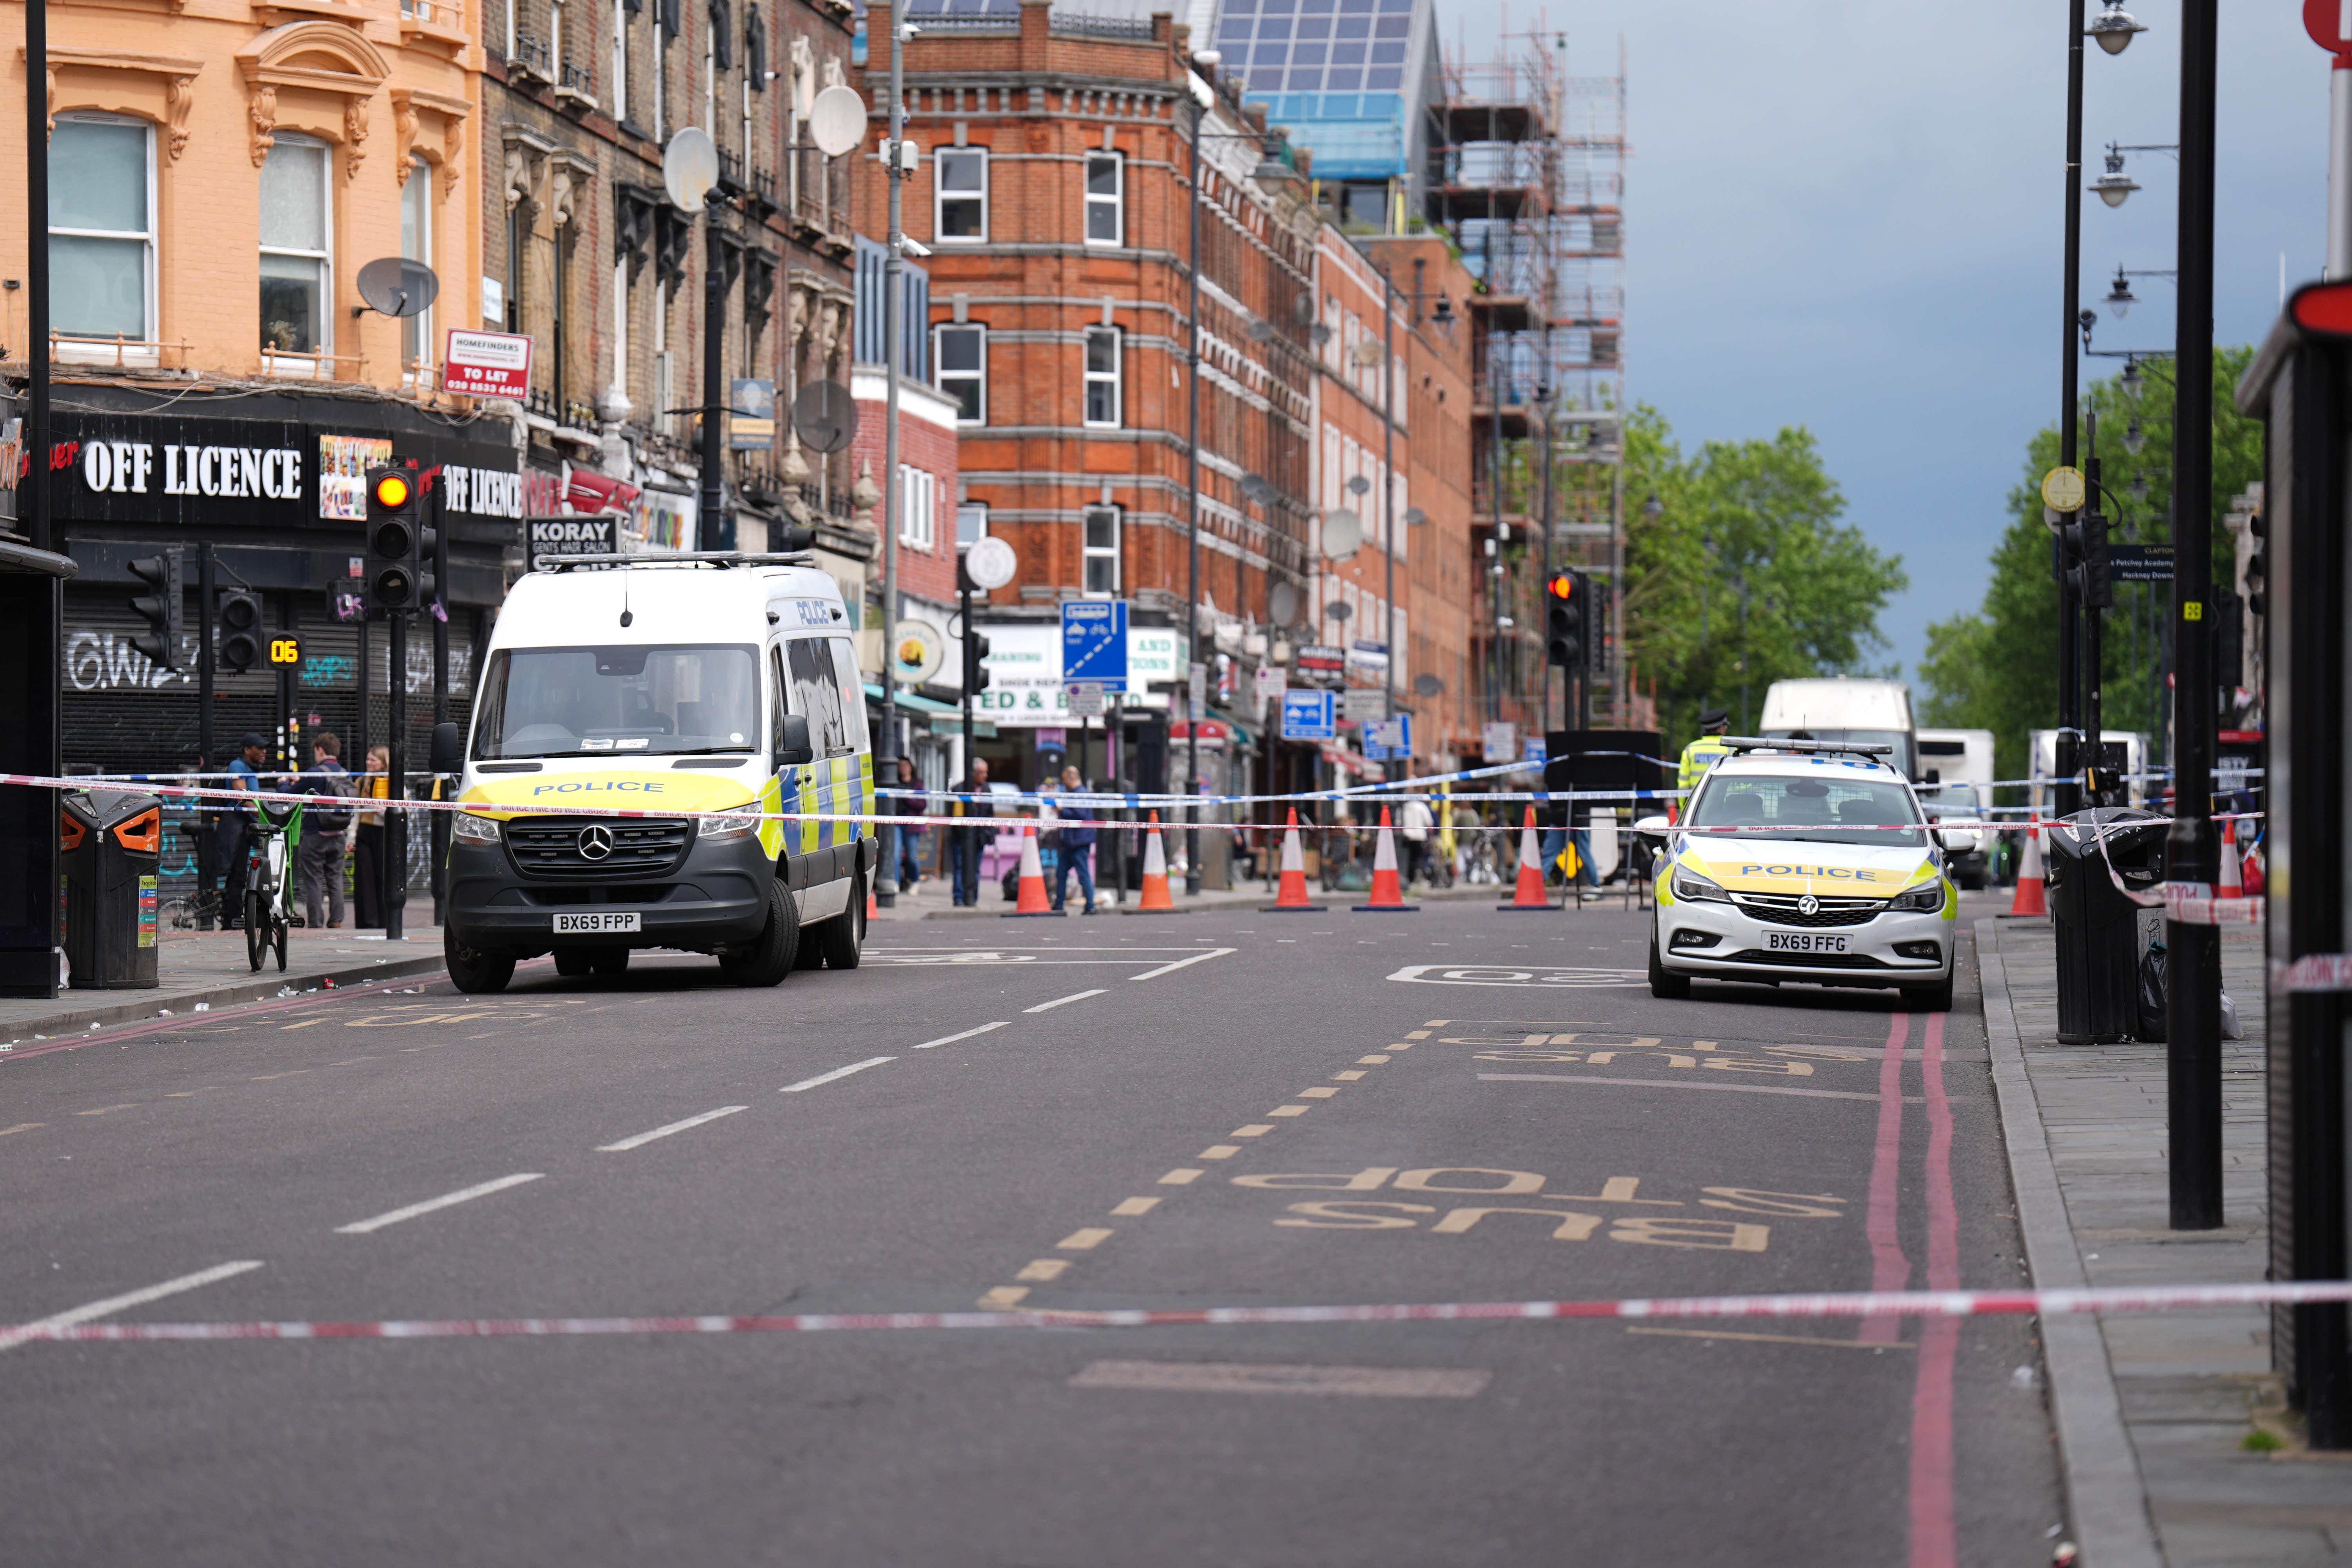 One crime scene remains in place in Kingsland High Street